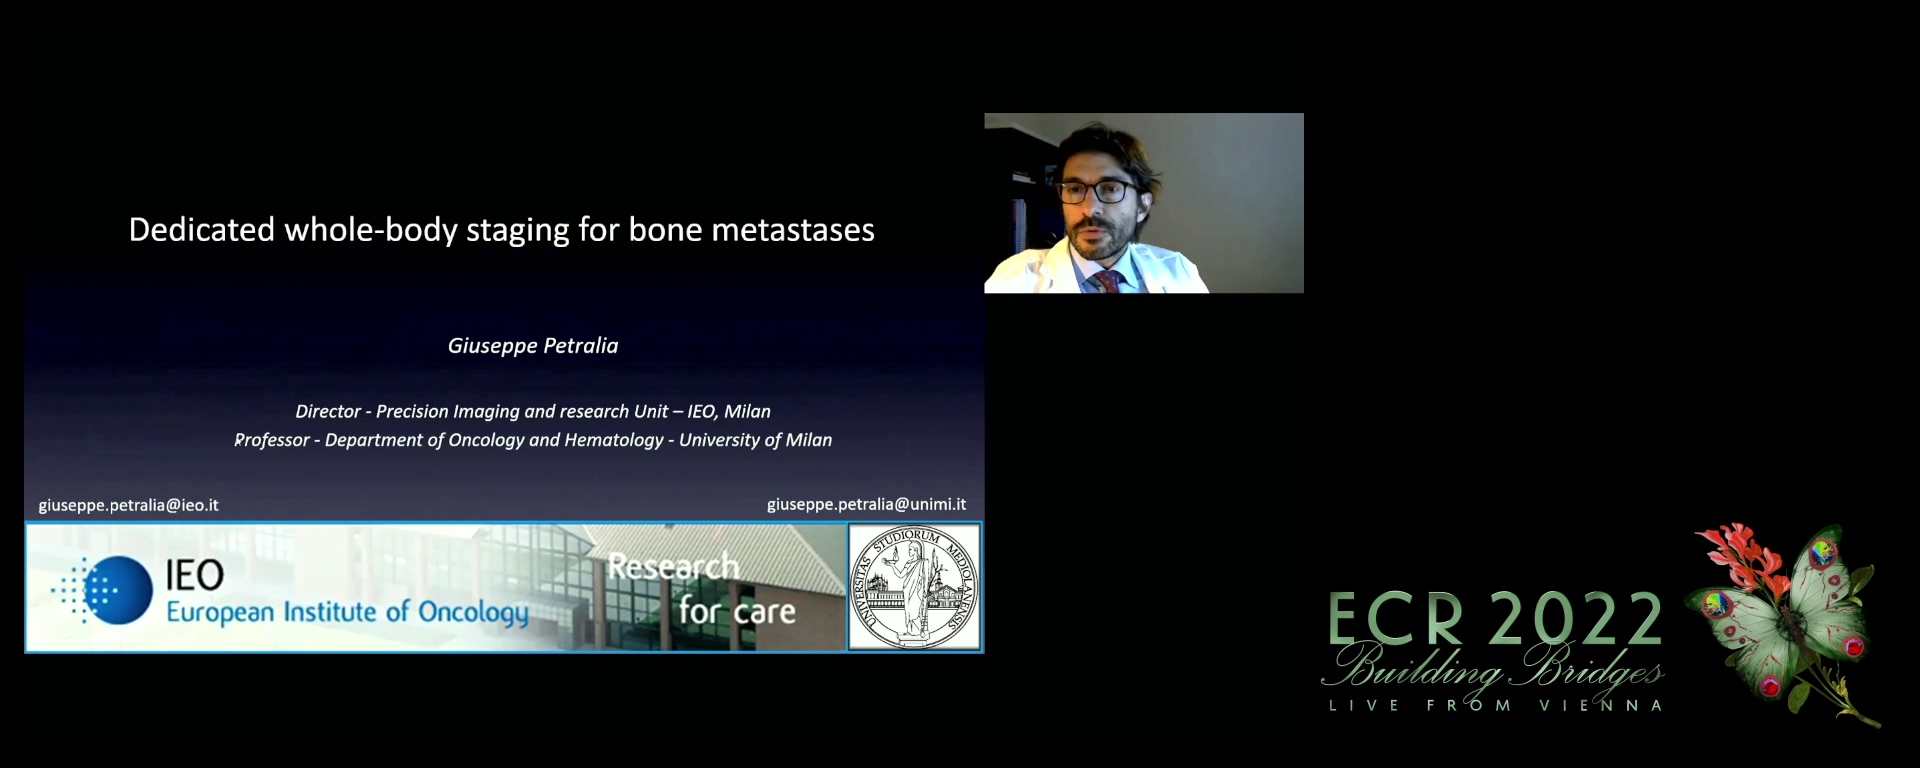 Dedicated whole-body staging for bone metastases